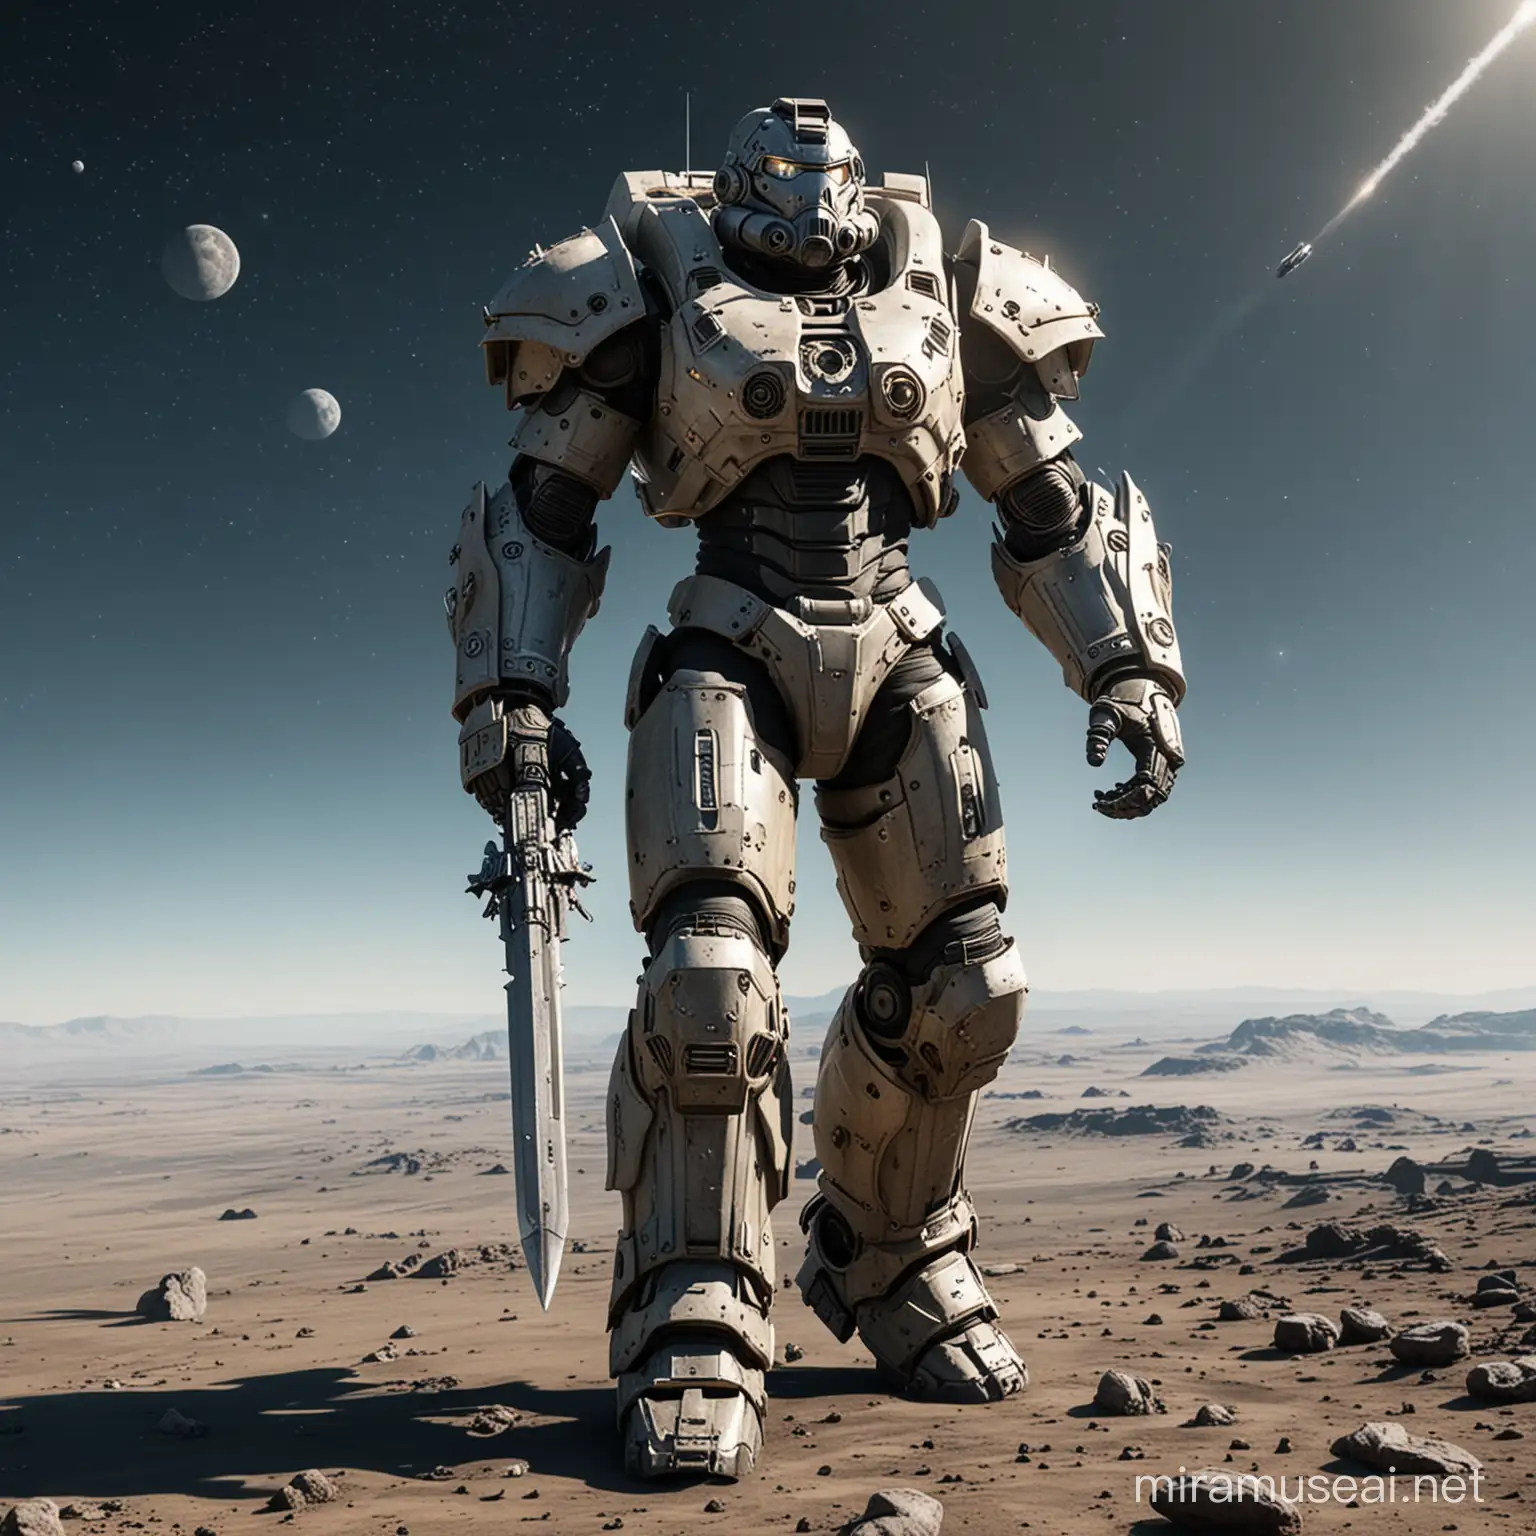 3-meter tall power armor suit with big sword  running in space, full body view